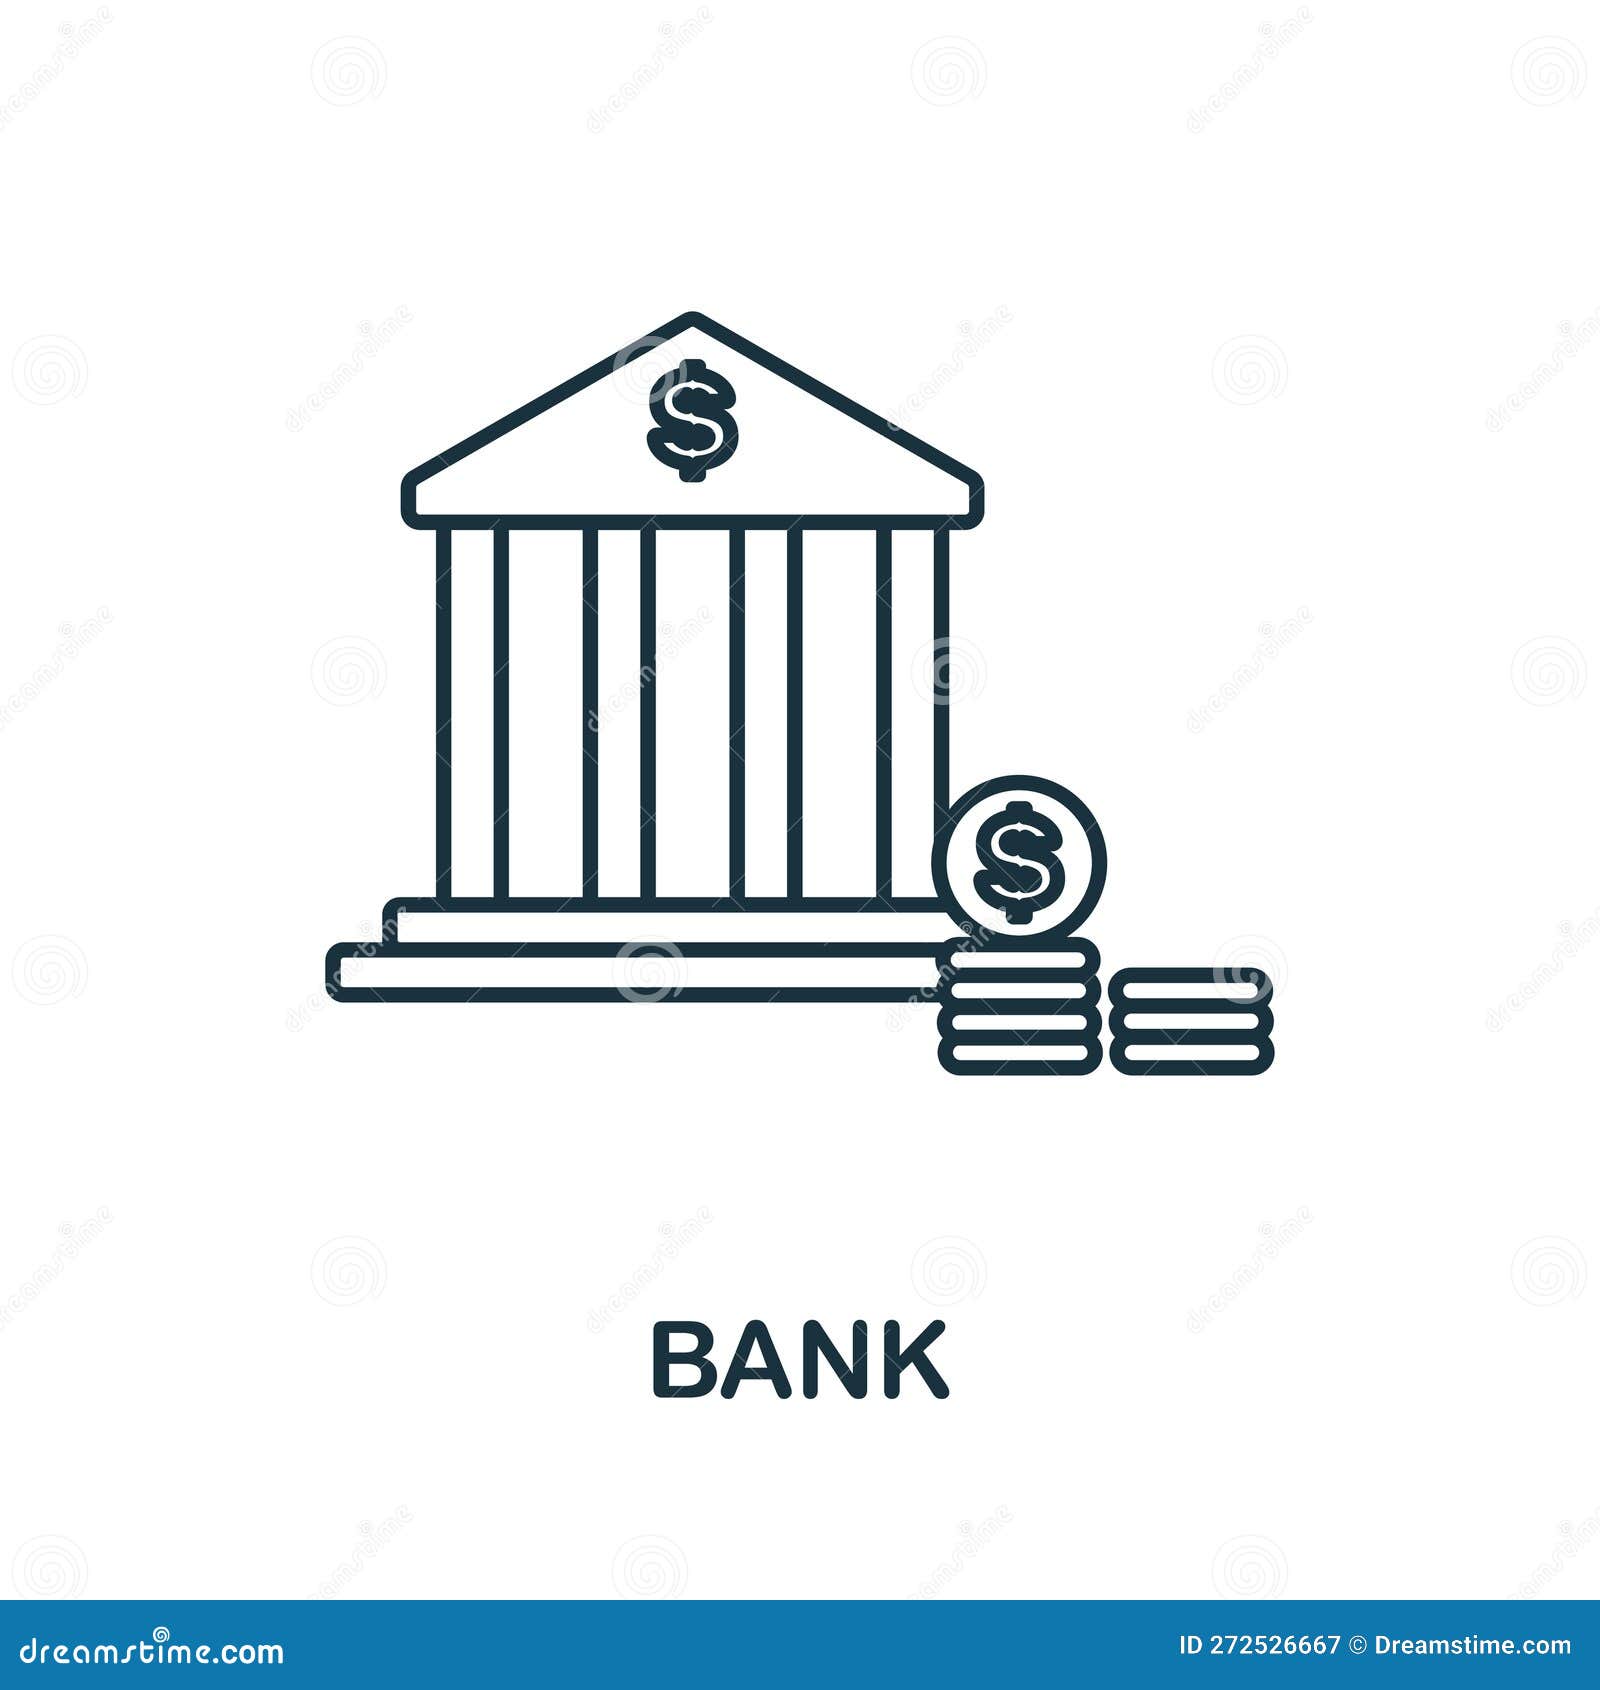 Bank Line Icon. Monochrome Simple Bank Outline Icon for Templates, Web  Design and Infographics Stock Vector - Illustration of stroke, vector:  272526667